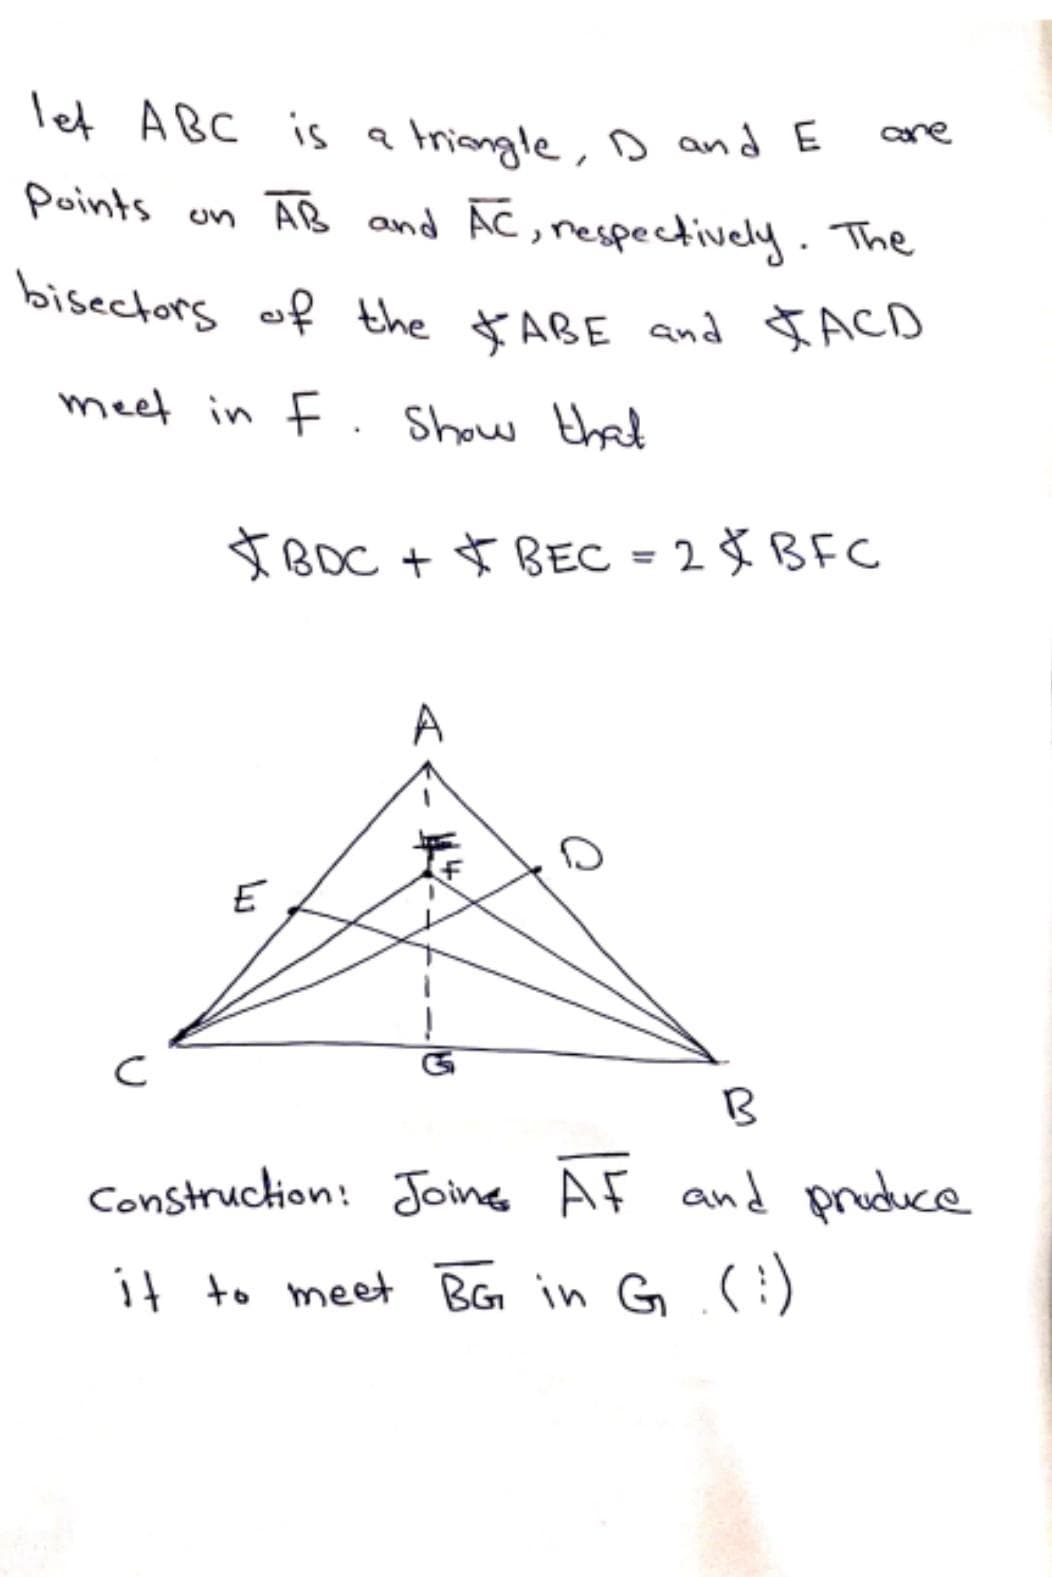 bisectors of the $ ABE and JACD
let ABC is a Iriengle, Dand E
points on AB and AC, nespectively. The
aare
bisectors of the $ABE and JACD
meet in F . Show that
IBOC + $ BEC = 2 Š BFC
%3D
A
E
Construction: Joins AF and pruduce
it to meet BG in G :)
